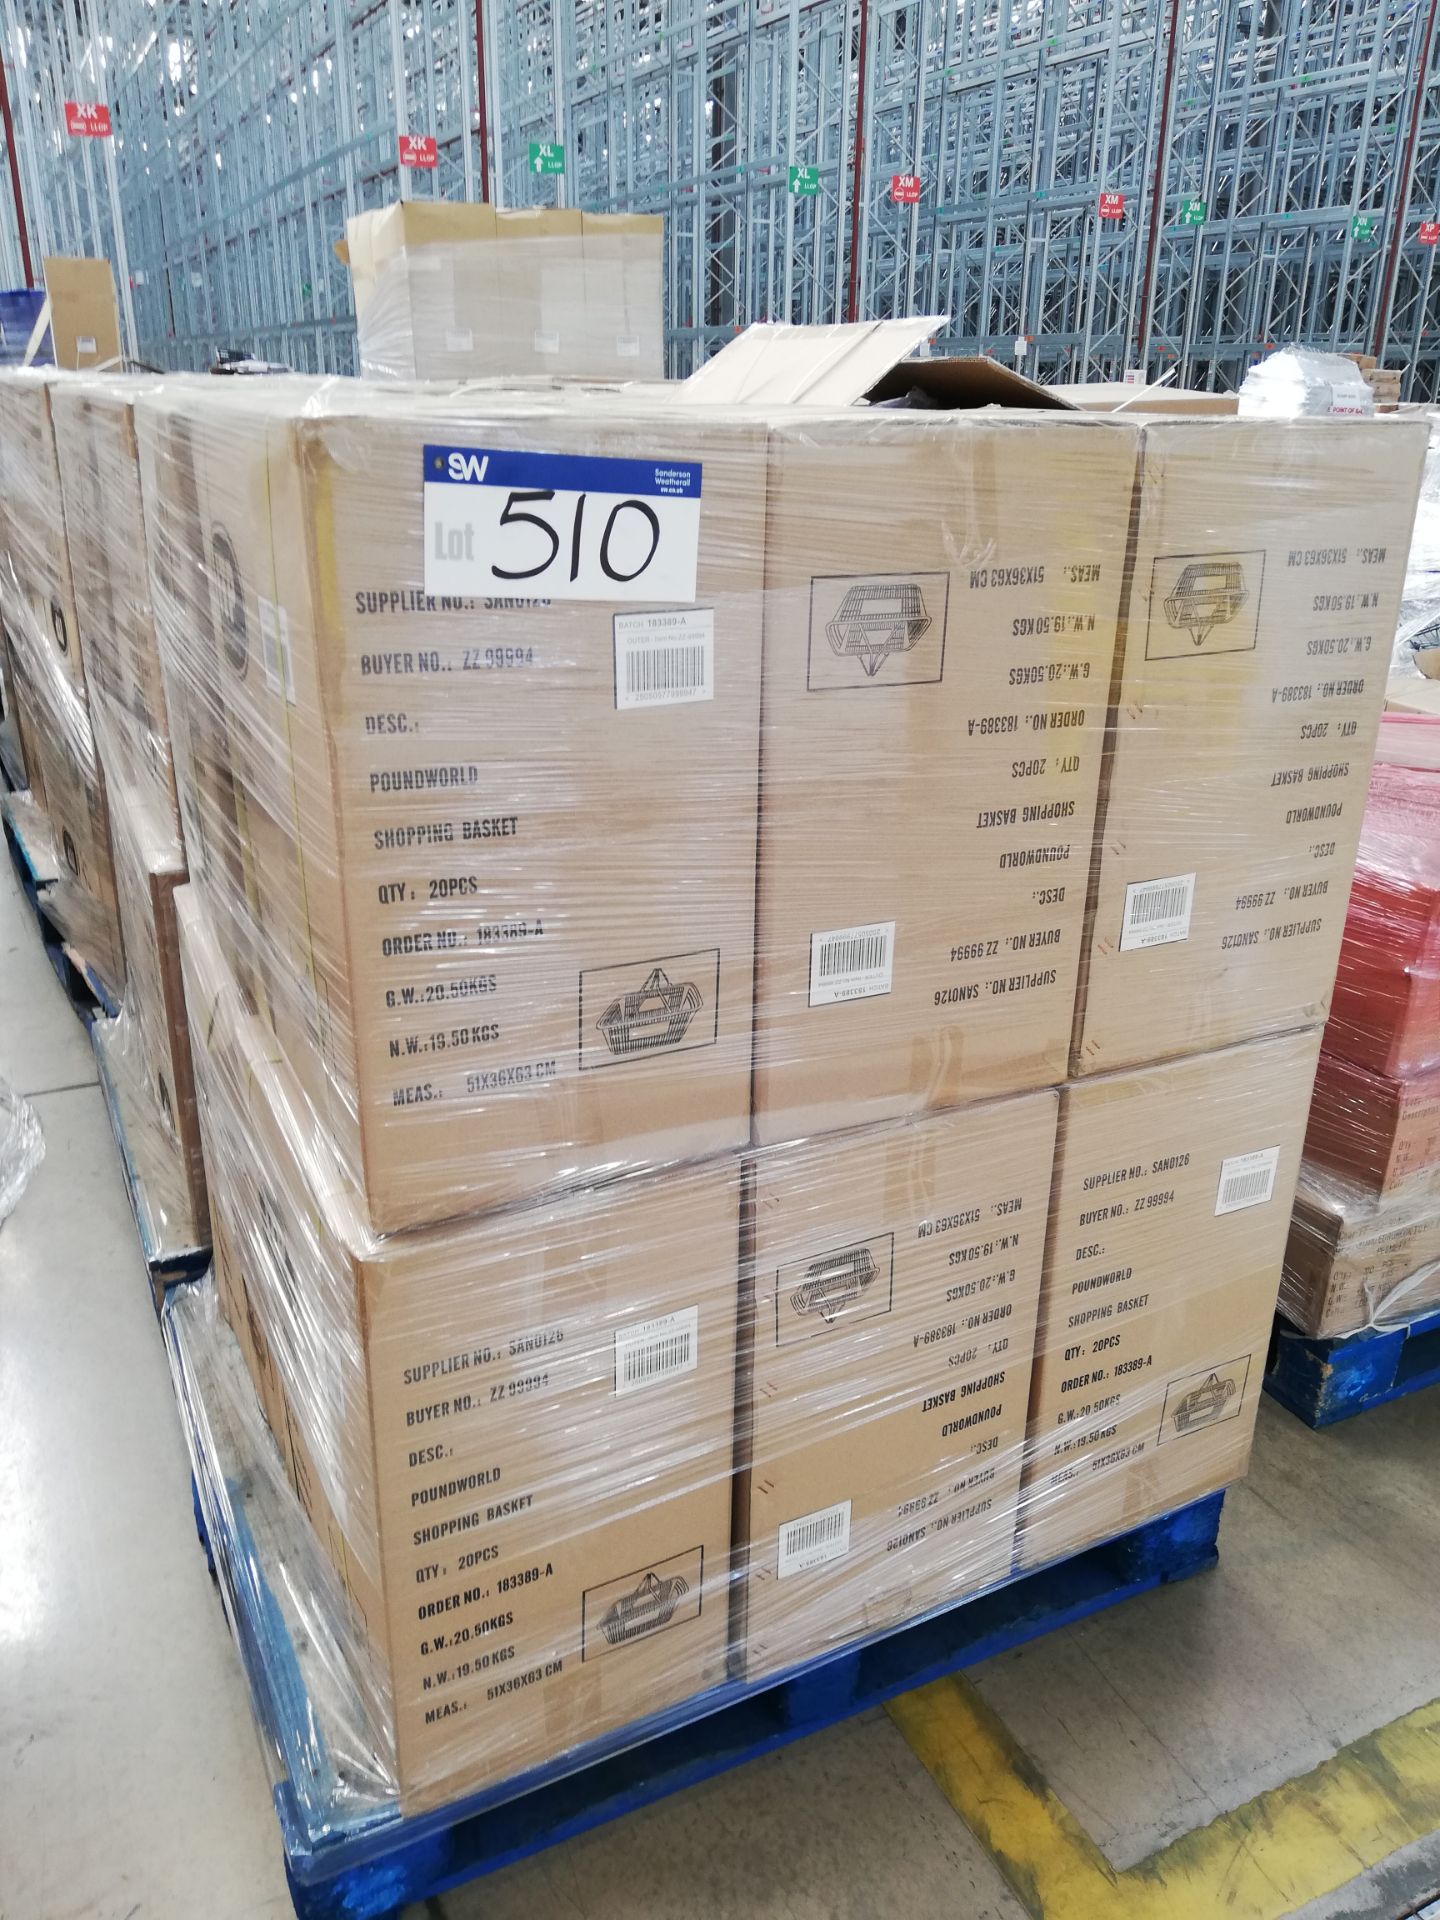 1,320 x ITP Poundworld Shopping Baskets (Boxed) on